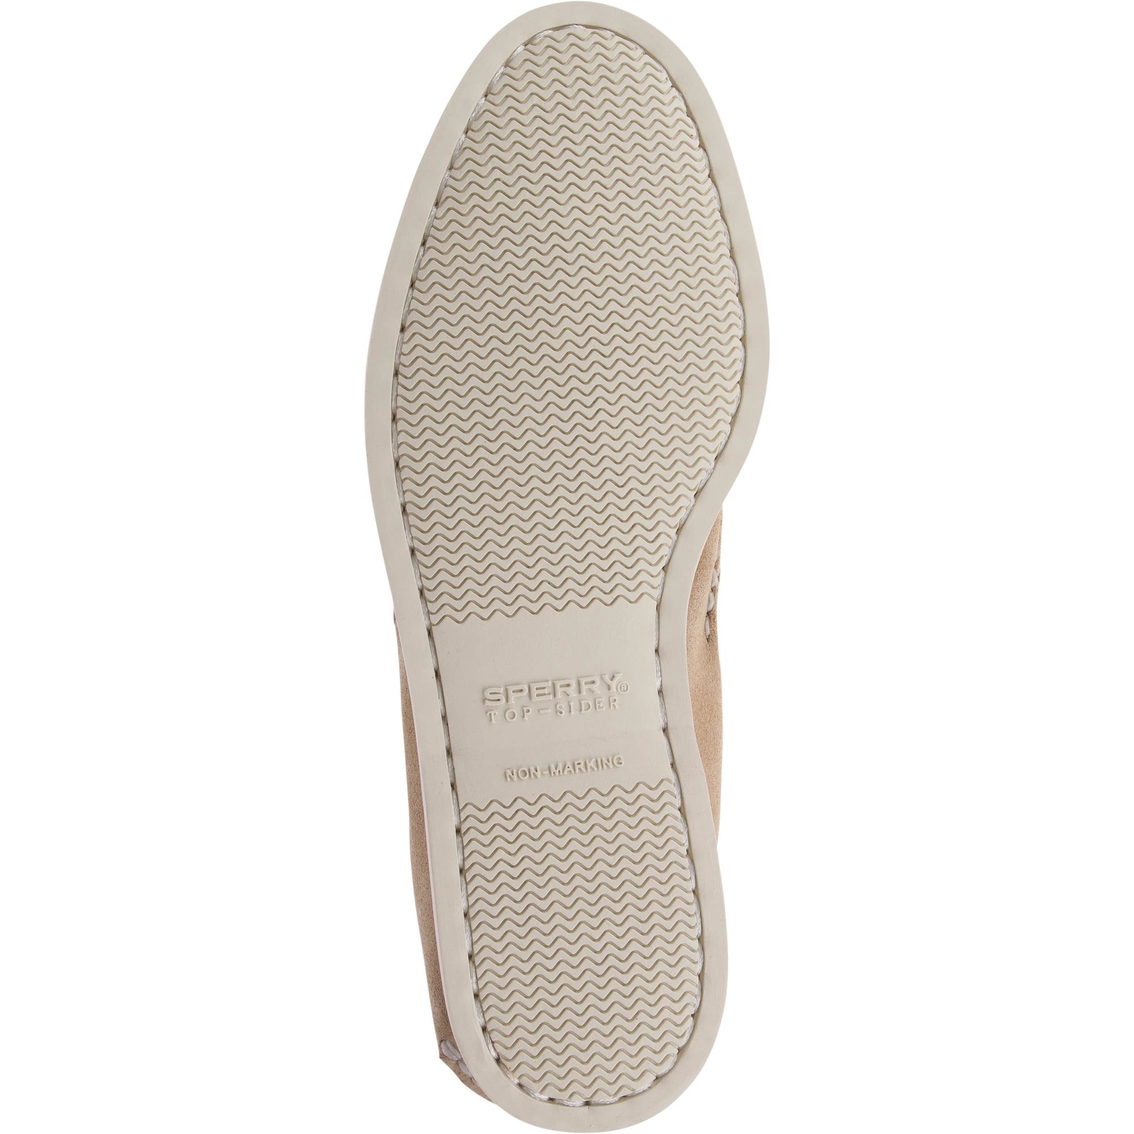 Sperry AO Penny Nautical Tan Loafers - Image 4 of 4